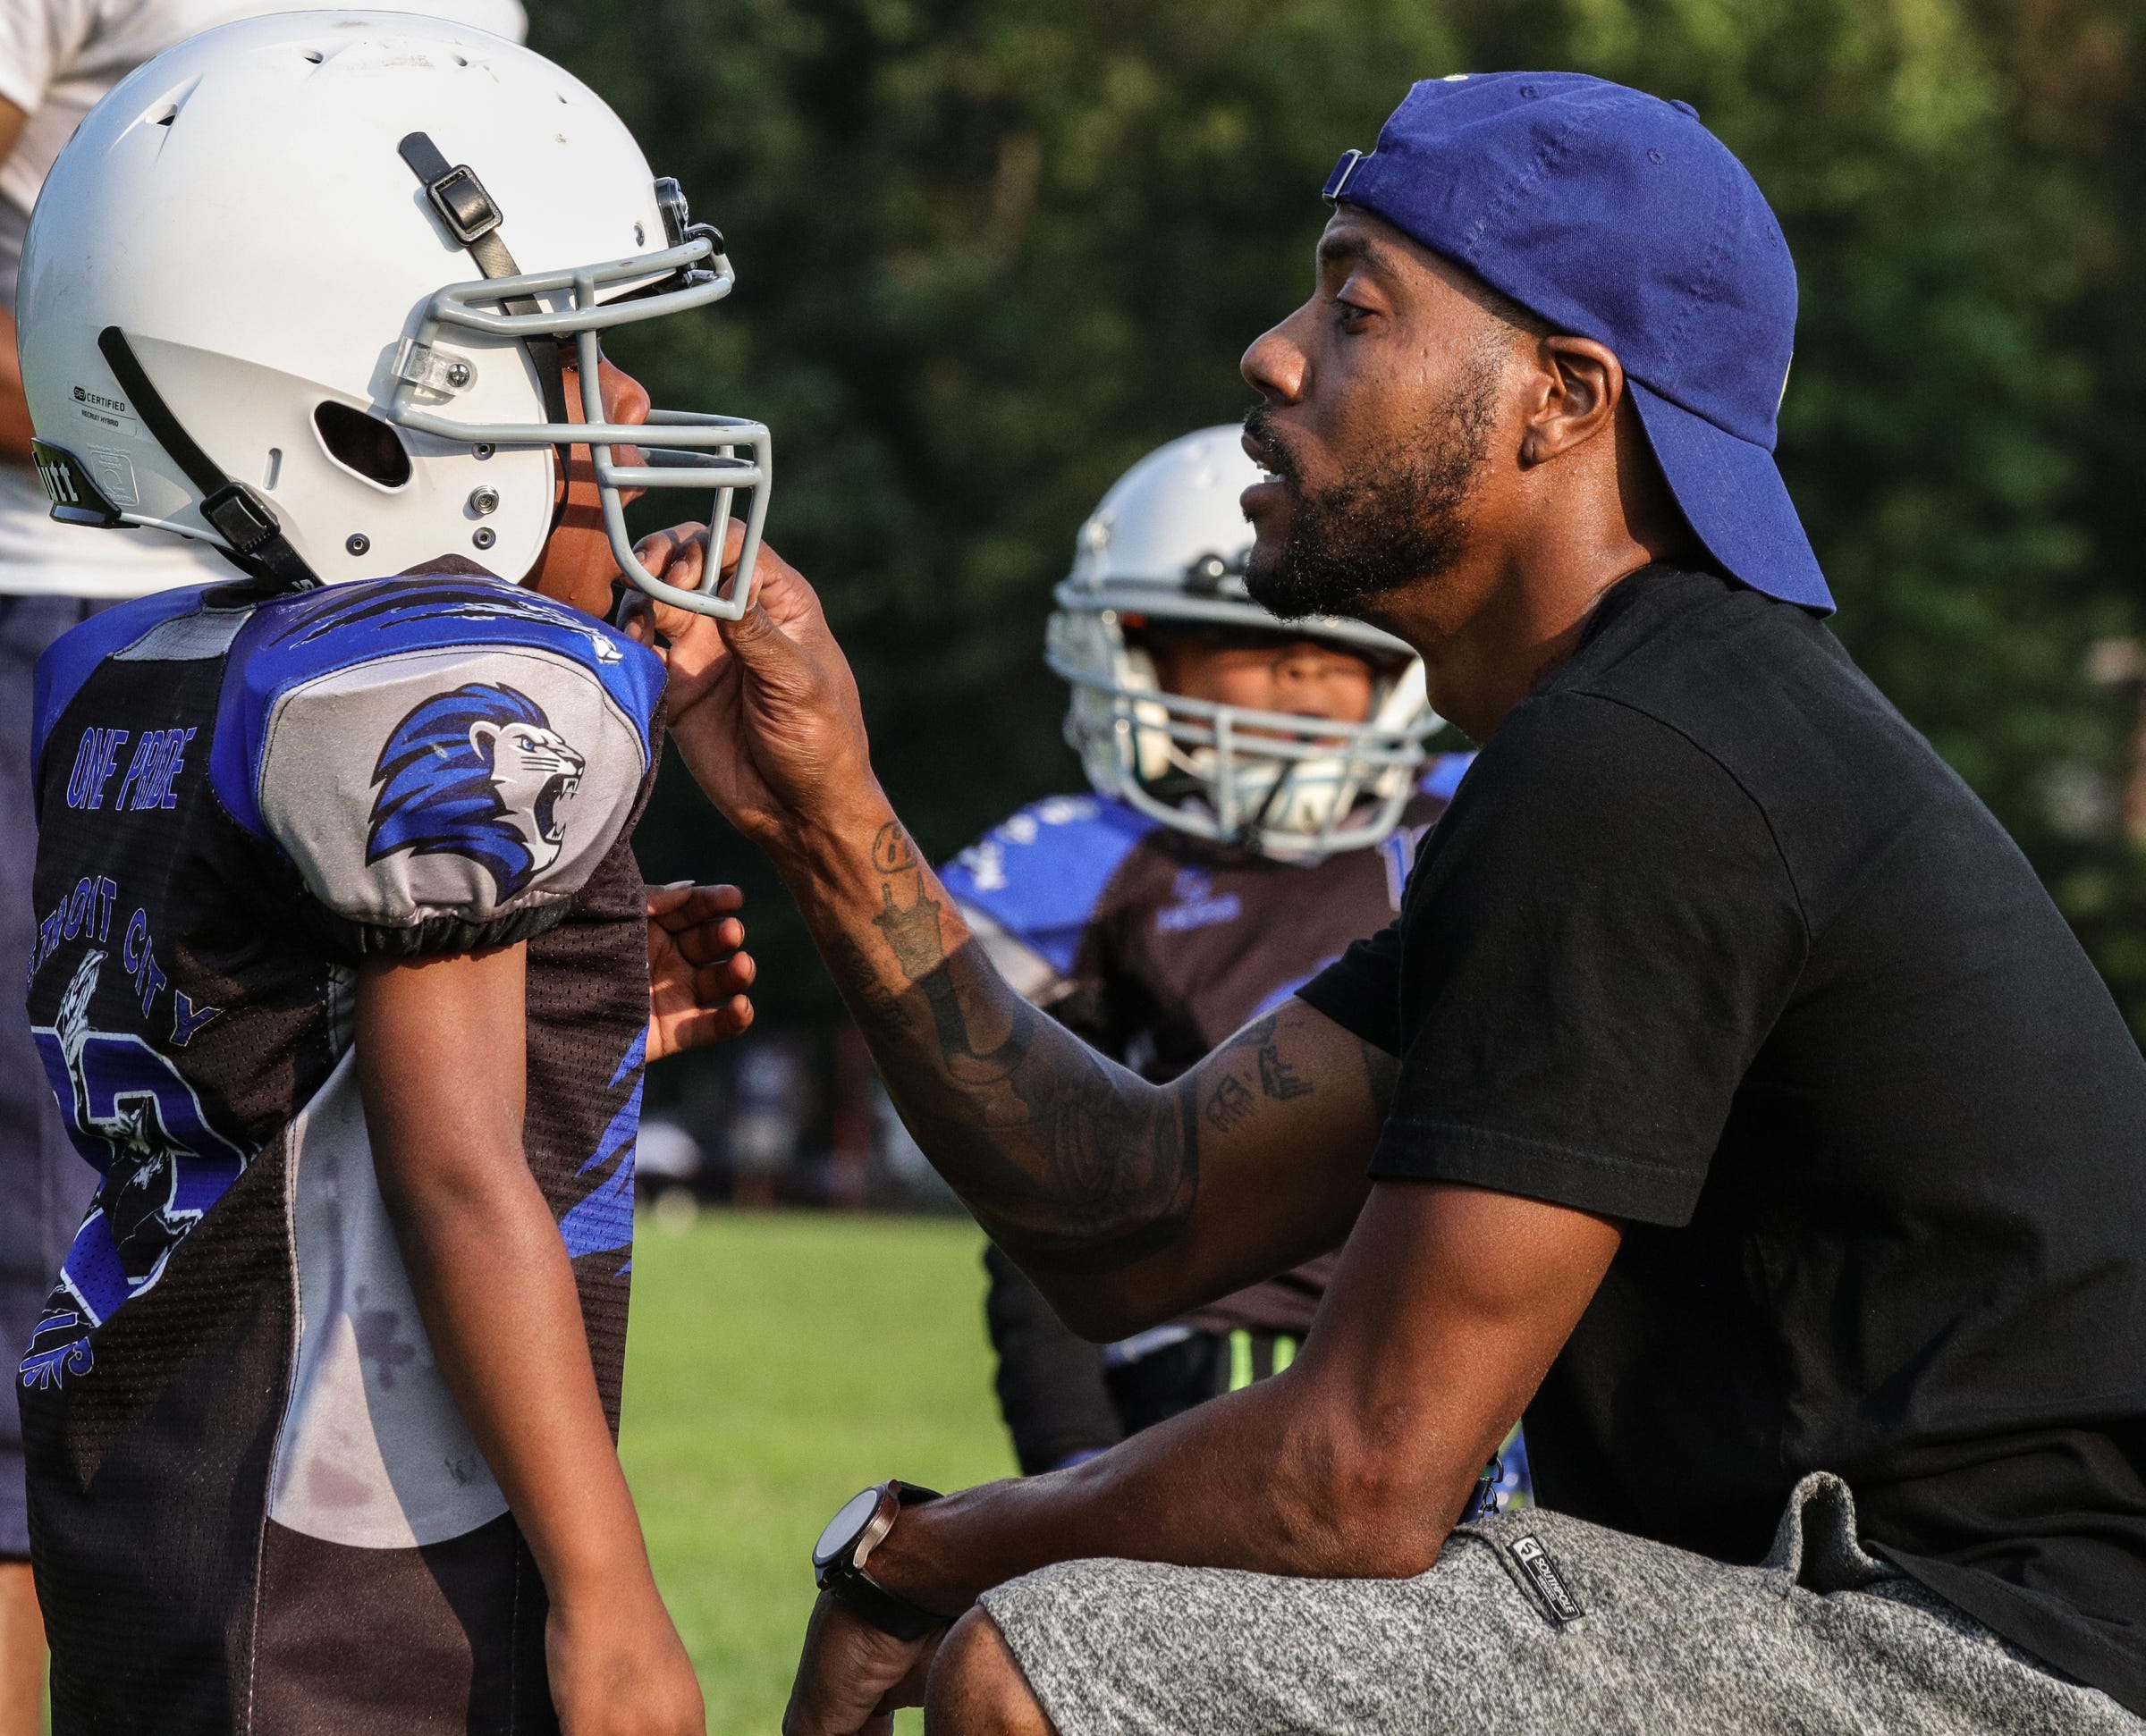 Coach Lorenzo Pearson talks with player during practice  at Marygrove College in Detroit on July 29, 2021. Detroit City Lions, a youth program founded by Devon Buskin is more than a youth football program. The program offers robotics classes, volleyball, musical arts along with football and cheer.